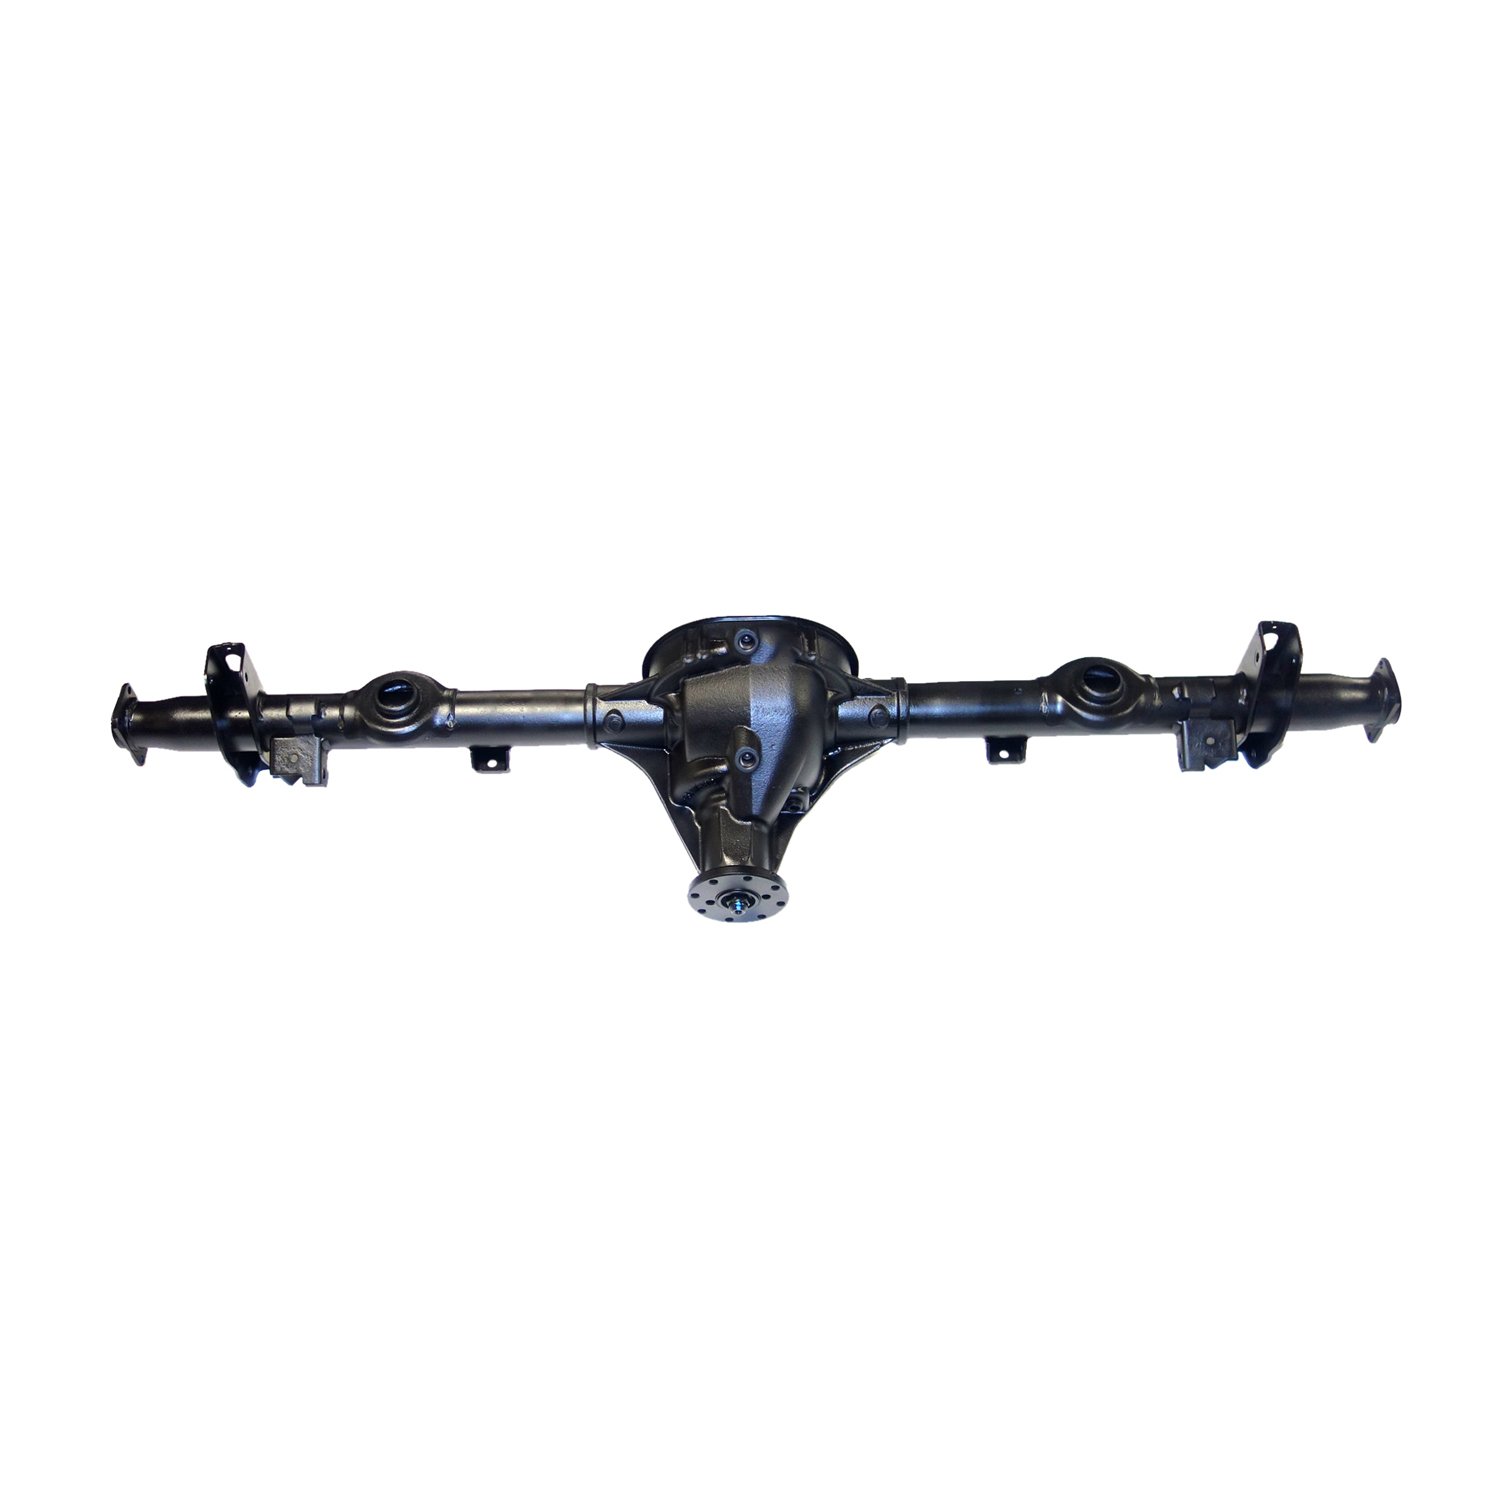 Remanufactured Complete Axle Assembly for 8.8" 03-04 Marauder 3.55 , ABS, Posi LSD